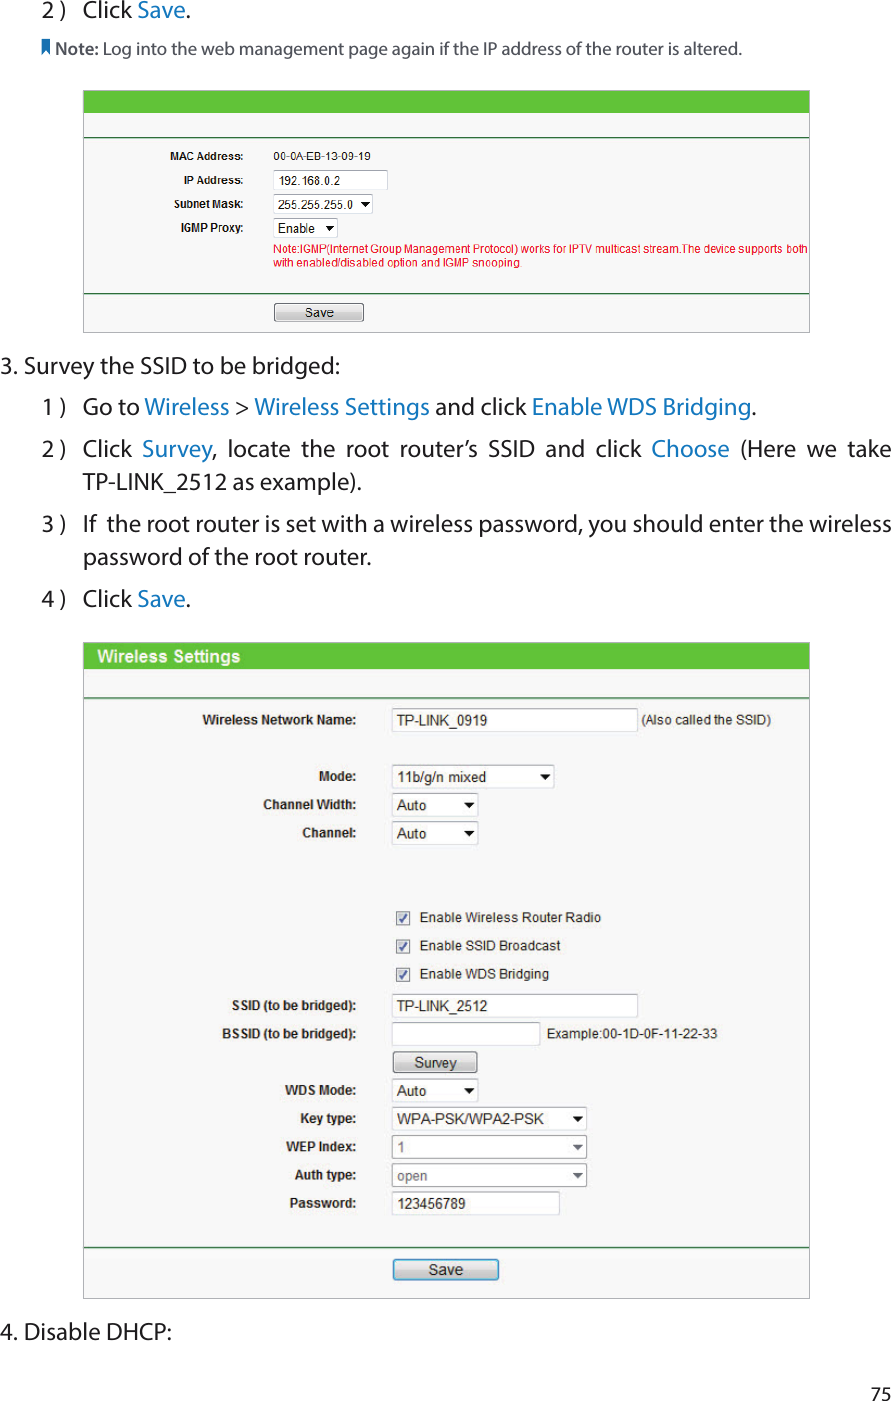 752 )  Click Save.Note: Log into the web management page again if the IP address of the router is altered.3. Survey the SSID to be bridged:1 )  Go to Wireless &gt; Wireless Settings and click Enable WDS Bridging.2 )  Click  Survey, locate the root router’s SSID and click Choose  (Here we take  TP-LINK_2512 as example).3 )  If  the root router is set with a wireless password, you should enter the wireless password of the root router.4 )  Click Save.4. Disable DHCP: